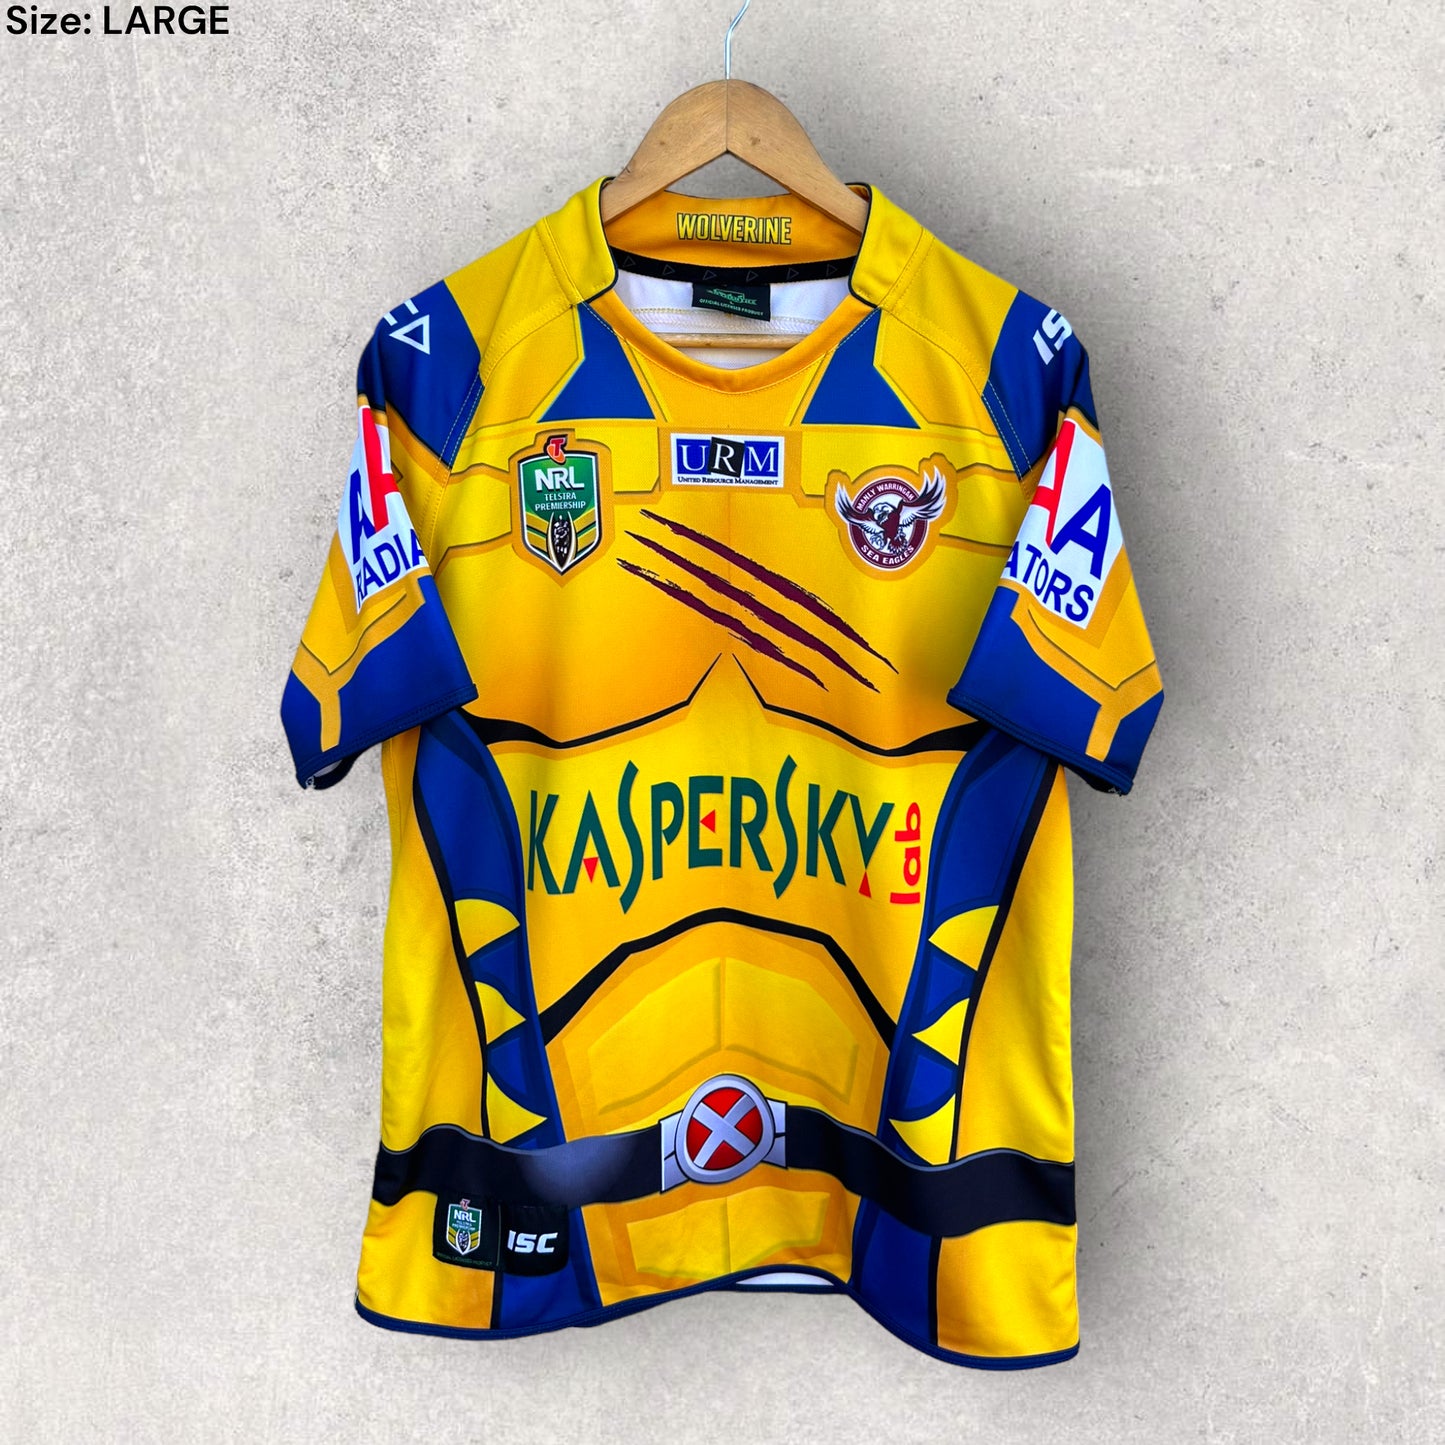 MANLY SEA EAGLES WOLVERINE 2014 JERSEY